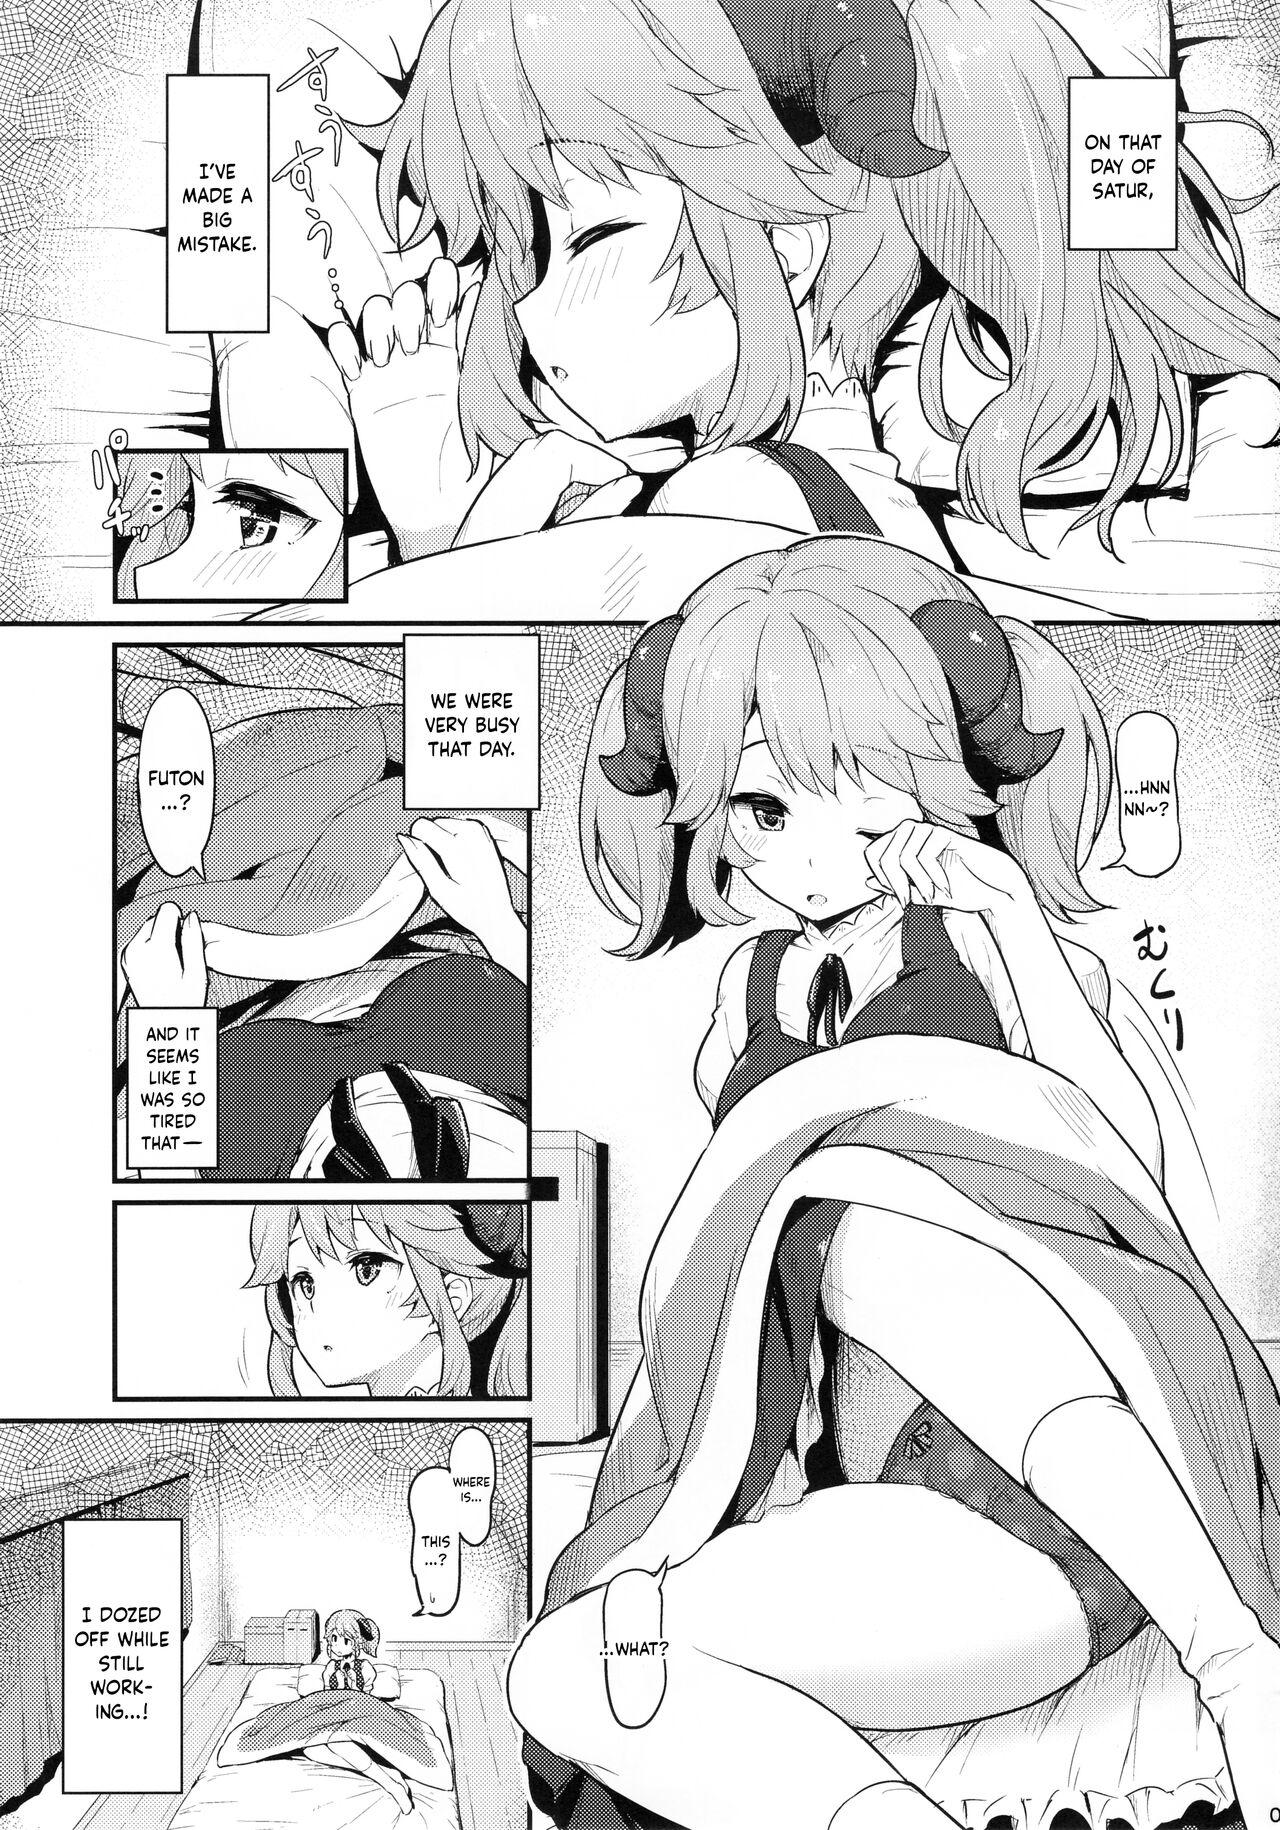 Ameture Porn Toaru Doyou no Hi | On a Certain Day of Satur - Isekai shokudou | restaurant to another world Chaturbate - Page 2